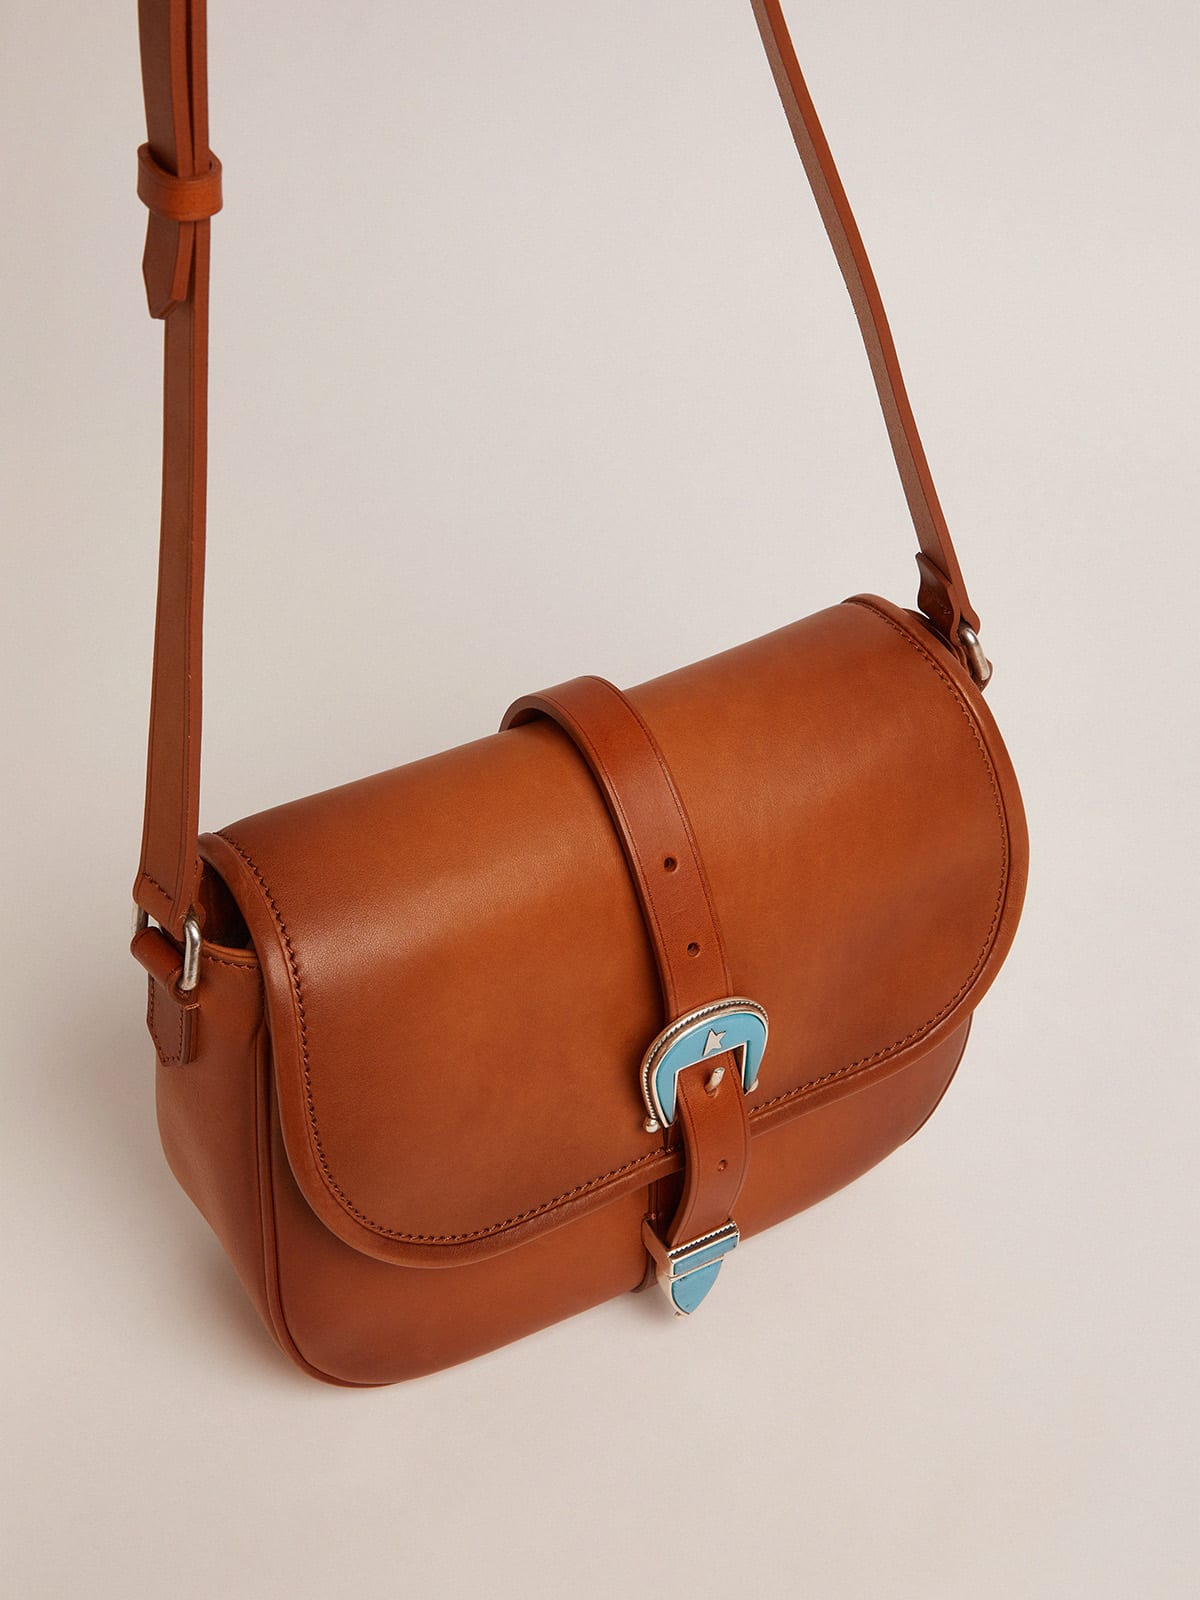 Golden Goose - Medium Rodeo Bag in tan-colored leather with light blue details in 